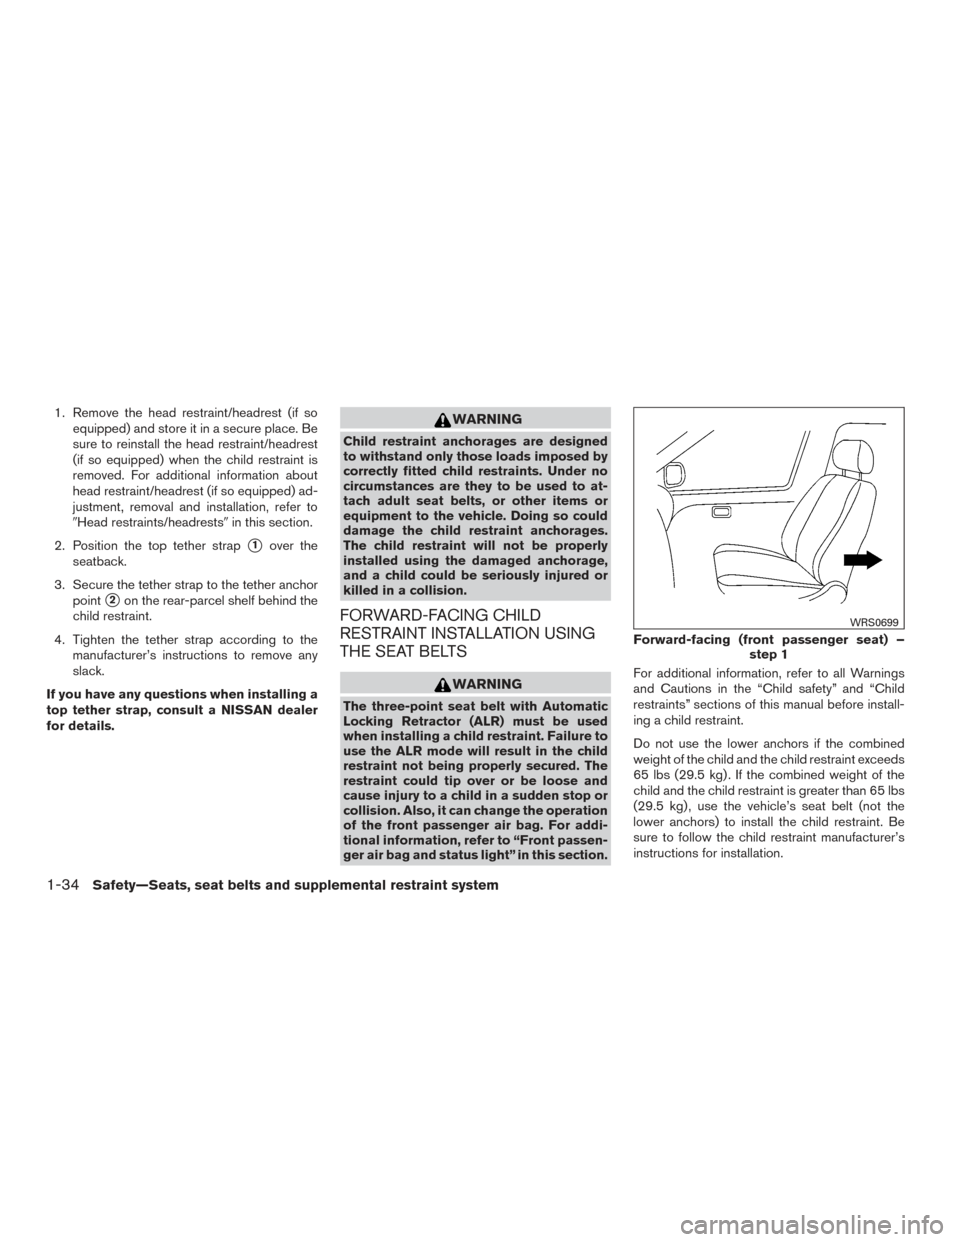 NISSAN ALTIMA 2016 L33 / 5.G Owners Guide 1. Remove the head restraint/headrest (if soequipped) and store it in a secure place. Be
sure to reinstall the head restraint/headrest
(if so equipped) when the child restraint is
removed. For additio